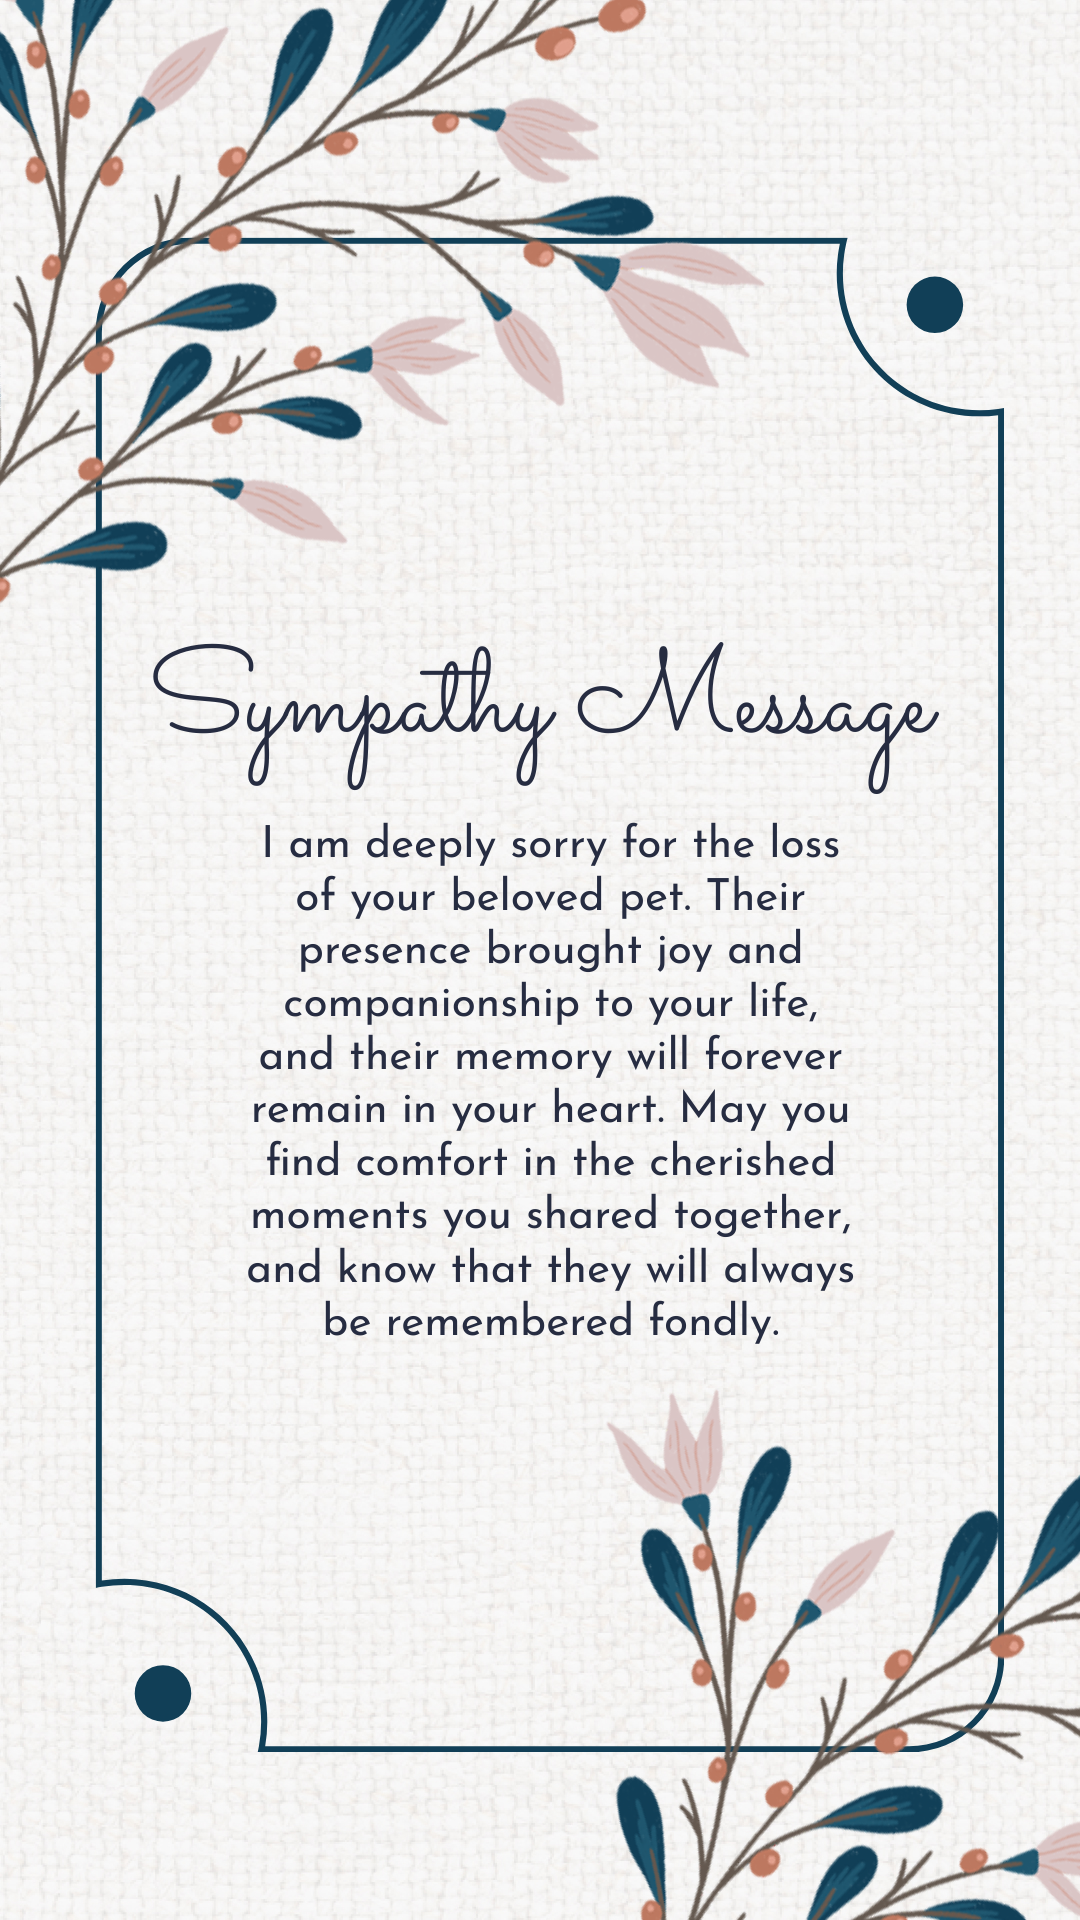 Sympathy message for loss of pet